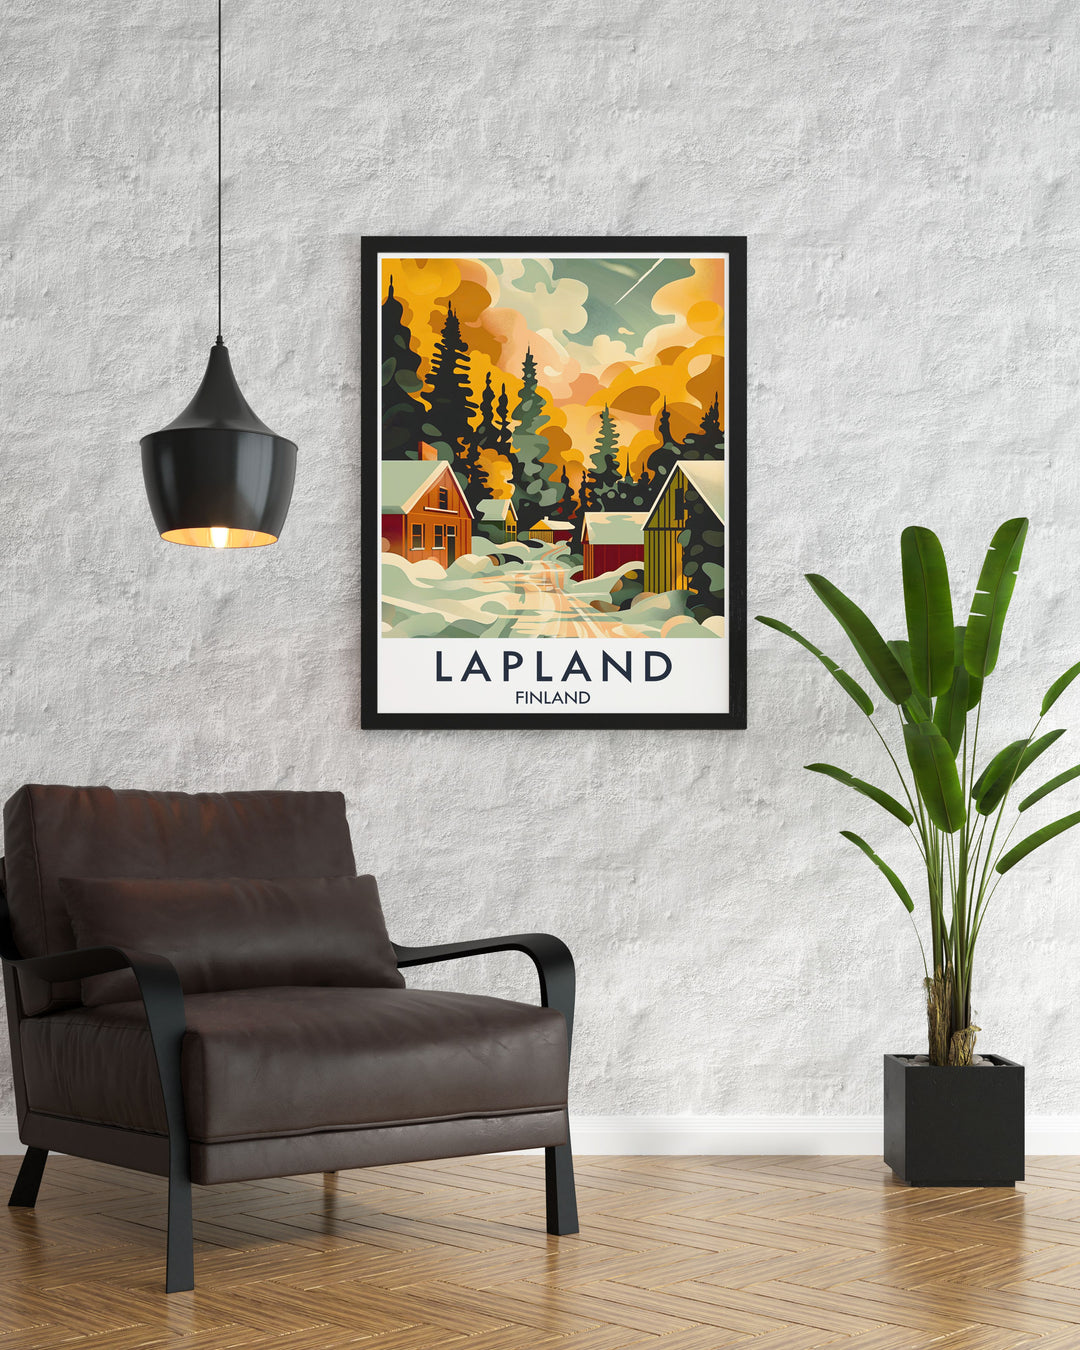 Beautiful Santa Claus Town Artwork showcasing the festive wonderland of Finland perfect for adding holiday cheer to any room or as a special gift for those who adore Christmas and festive decor.